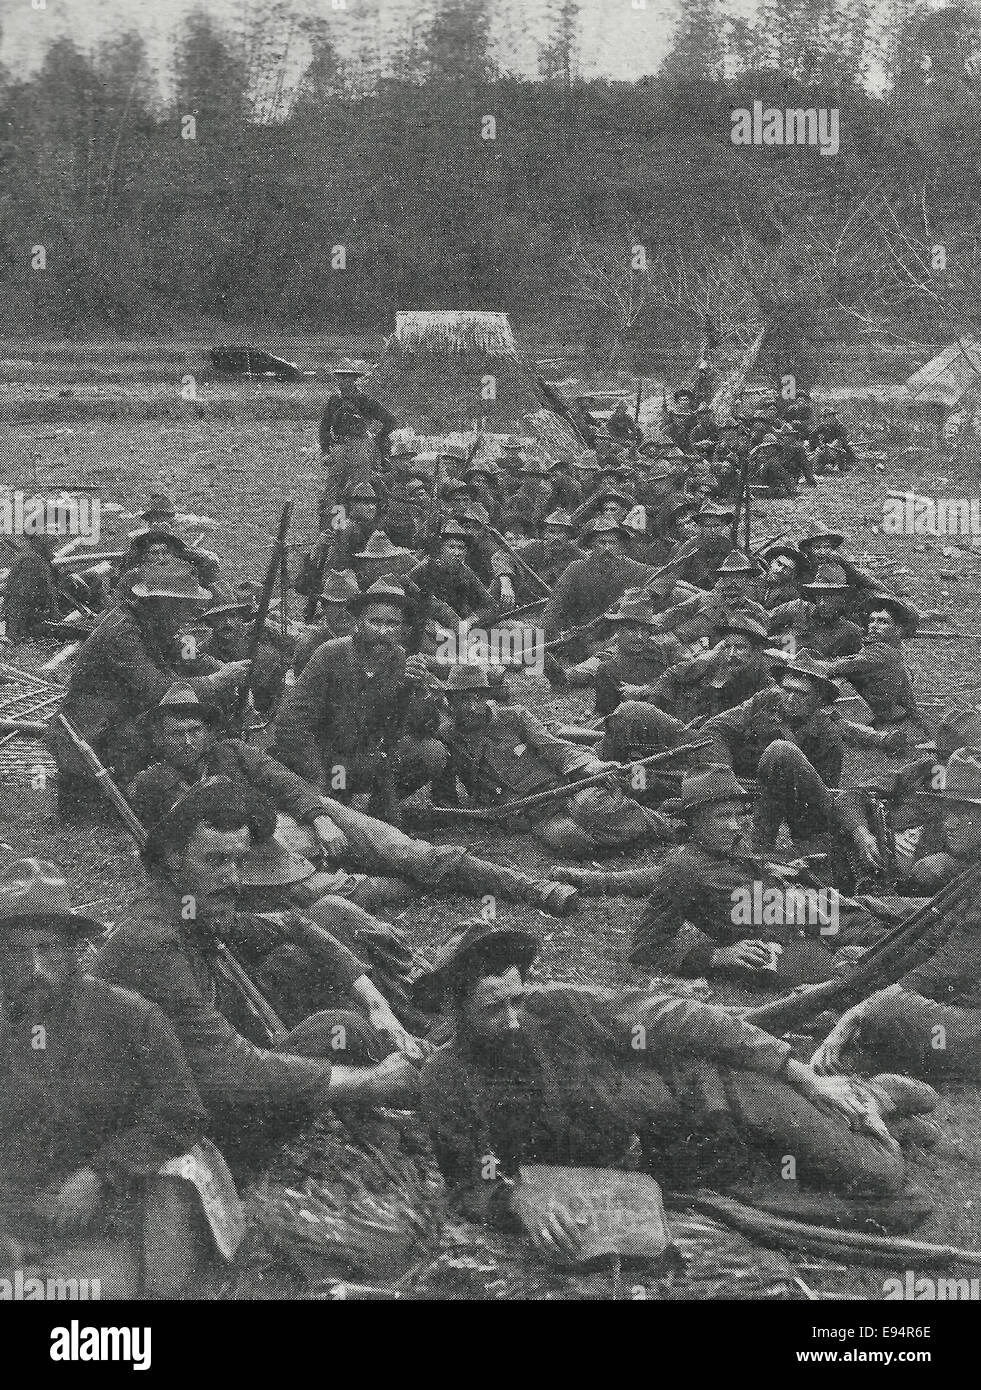 Troops waiting to be called to the front - Philippine Insurrection - 1899 Stock Photo